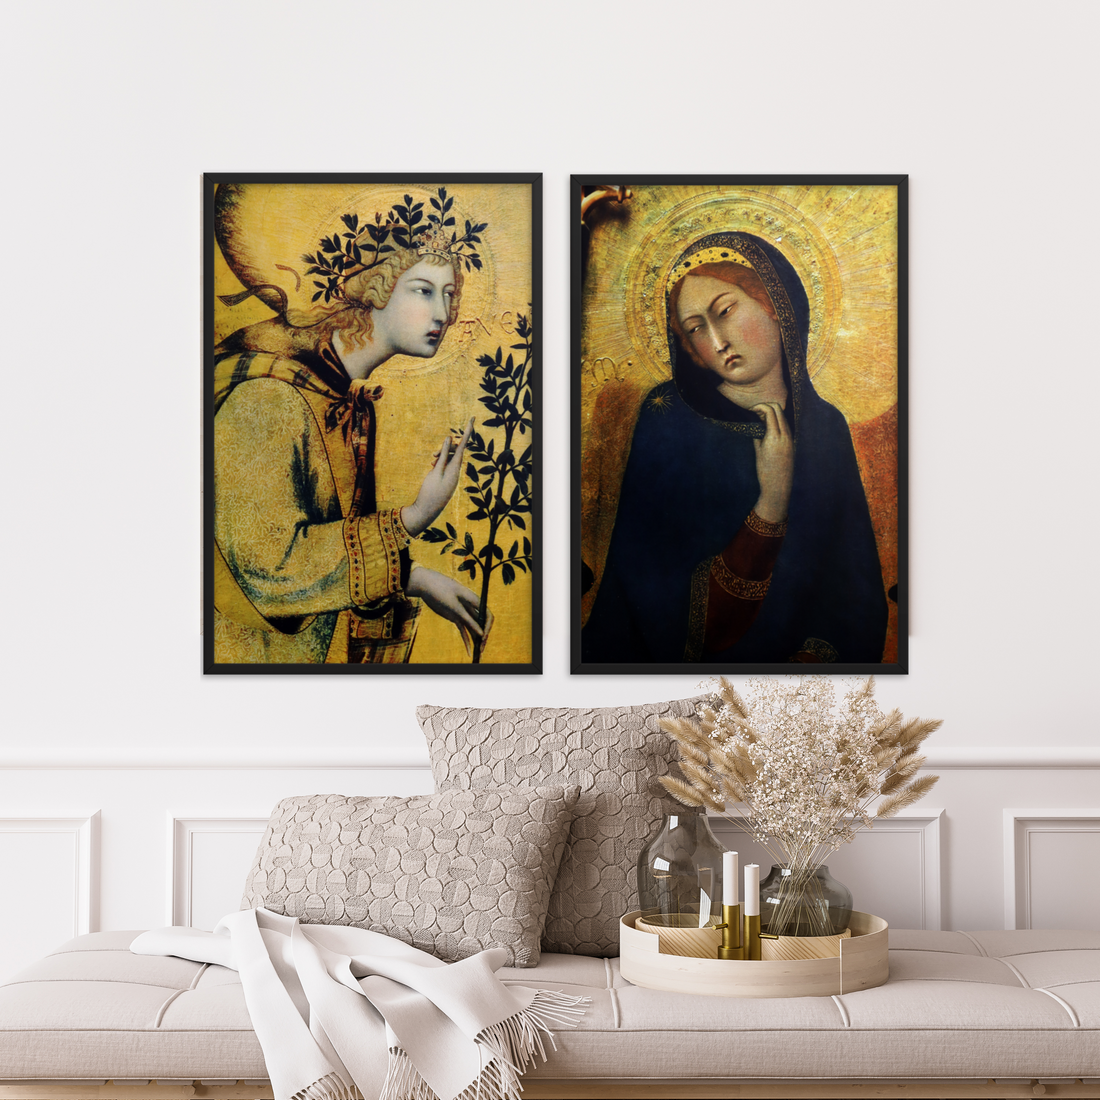 Celebrating Our Catholic Faith Through Art: Why We Should Embrace Our Tradition of Religious Artwork - Sanctus Art Gallery